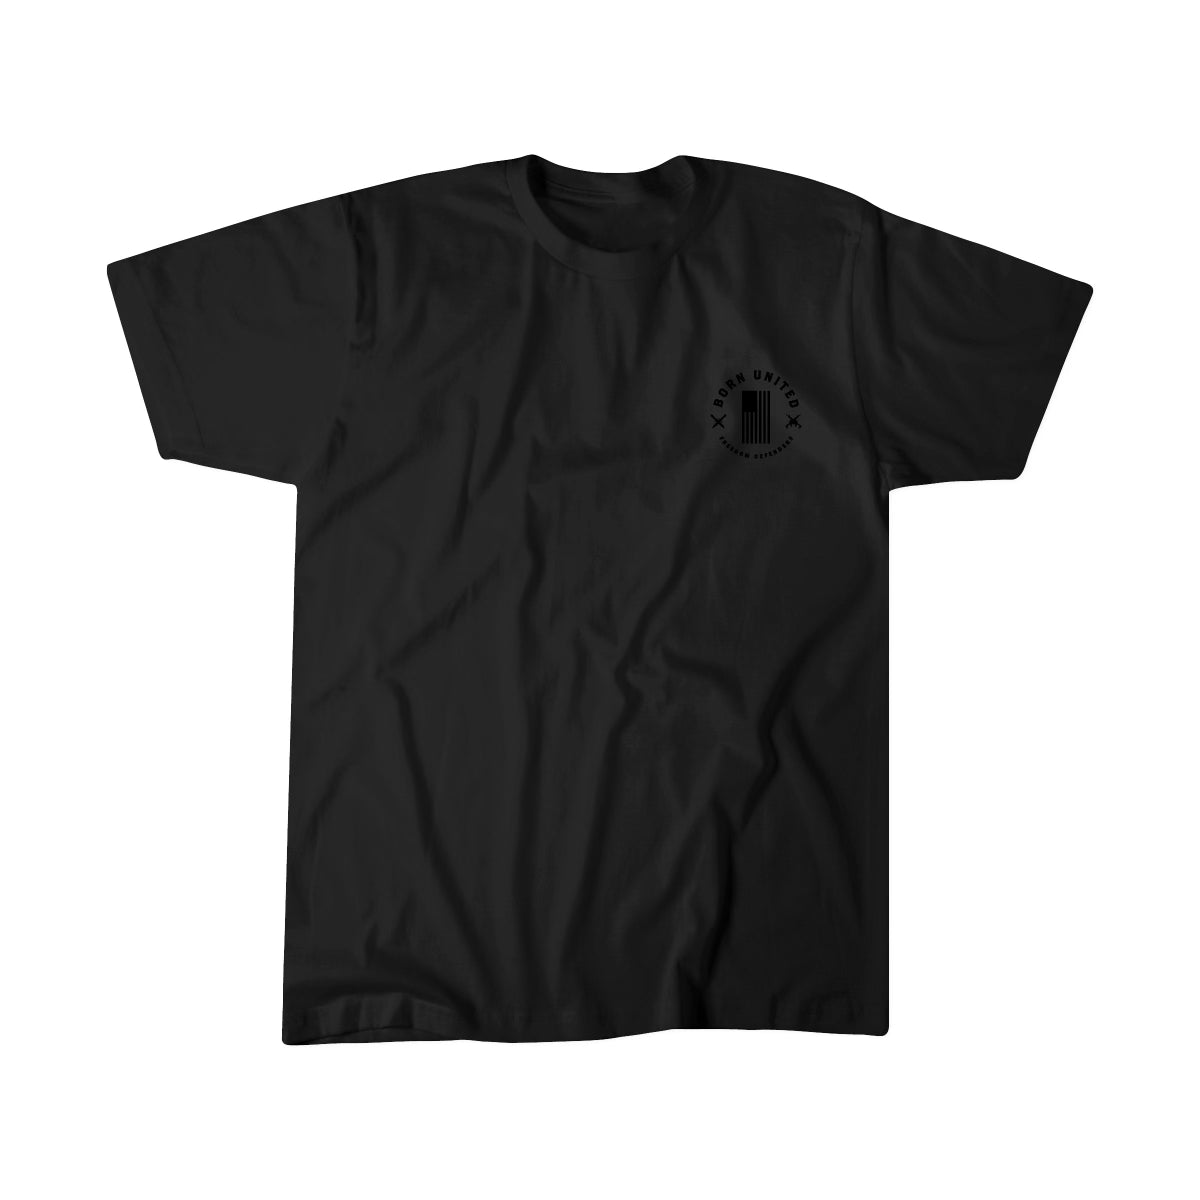 Stay Deadly Tee - BlackOut